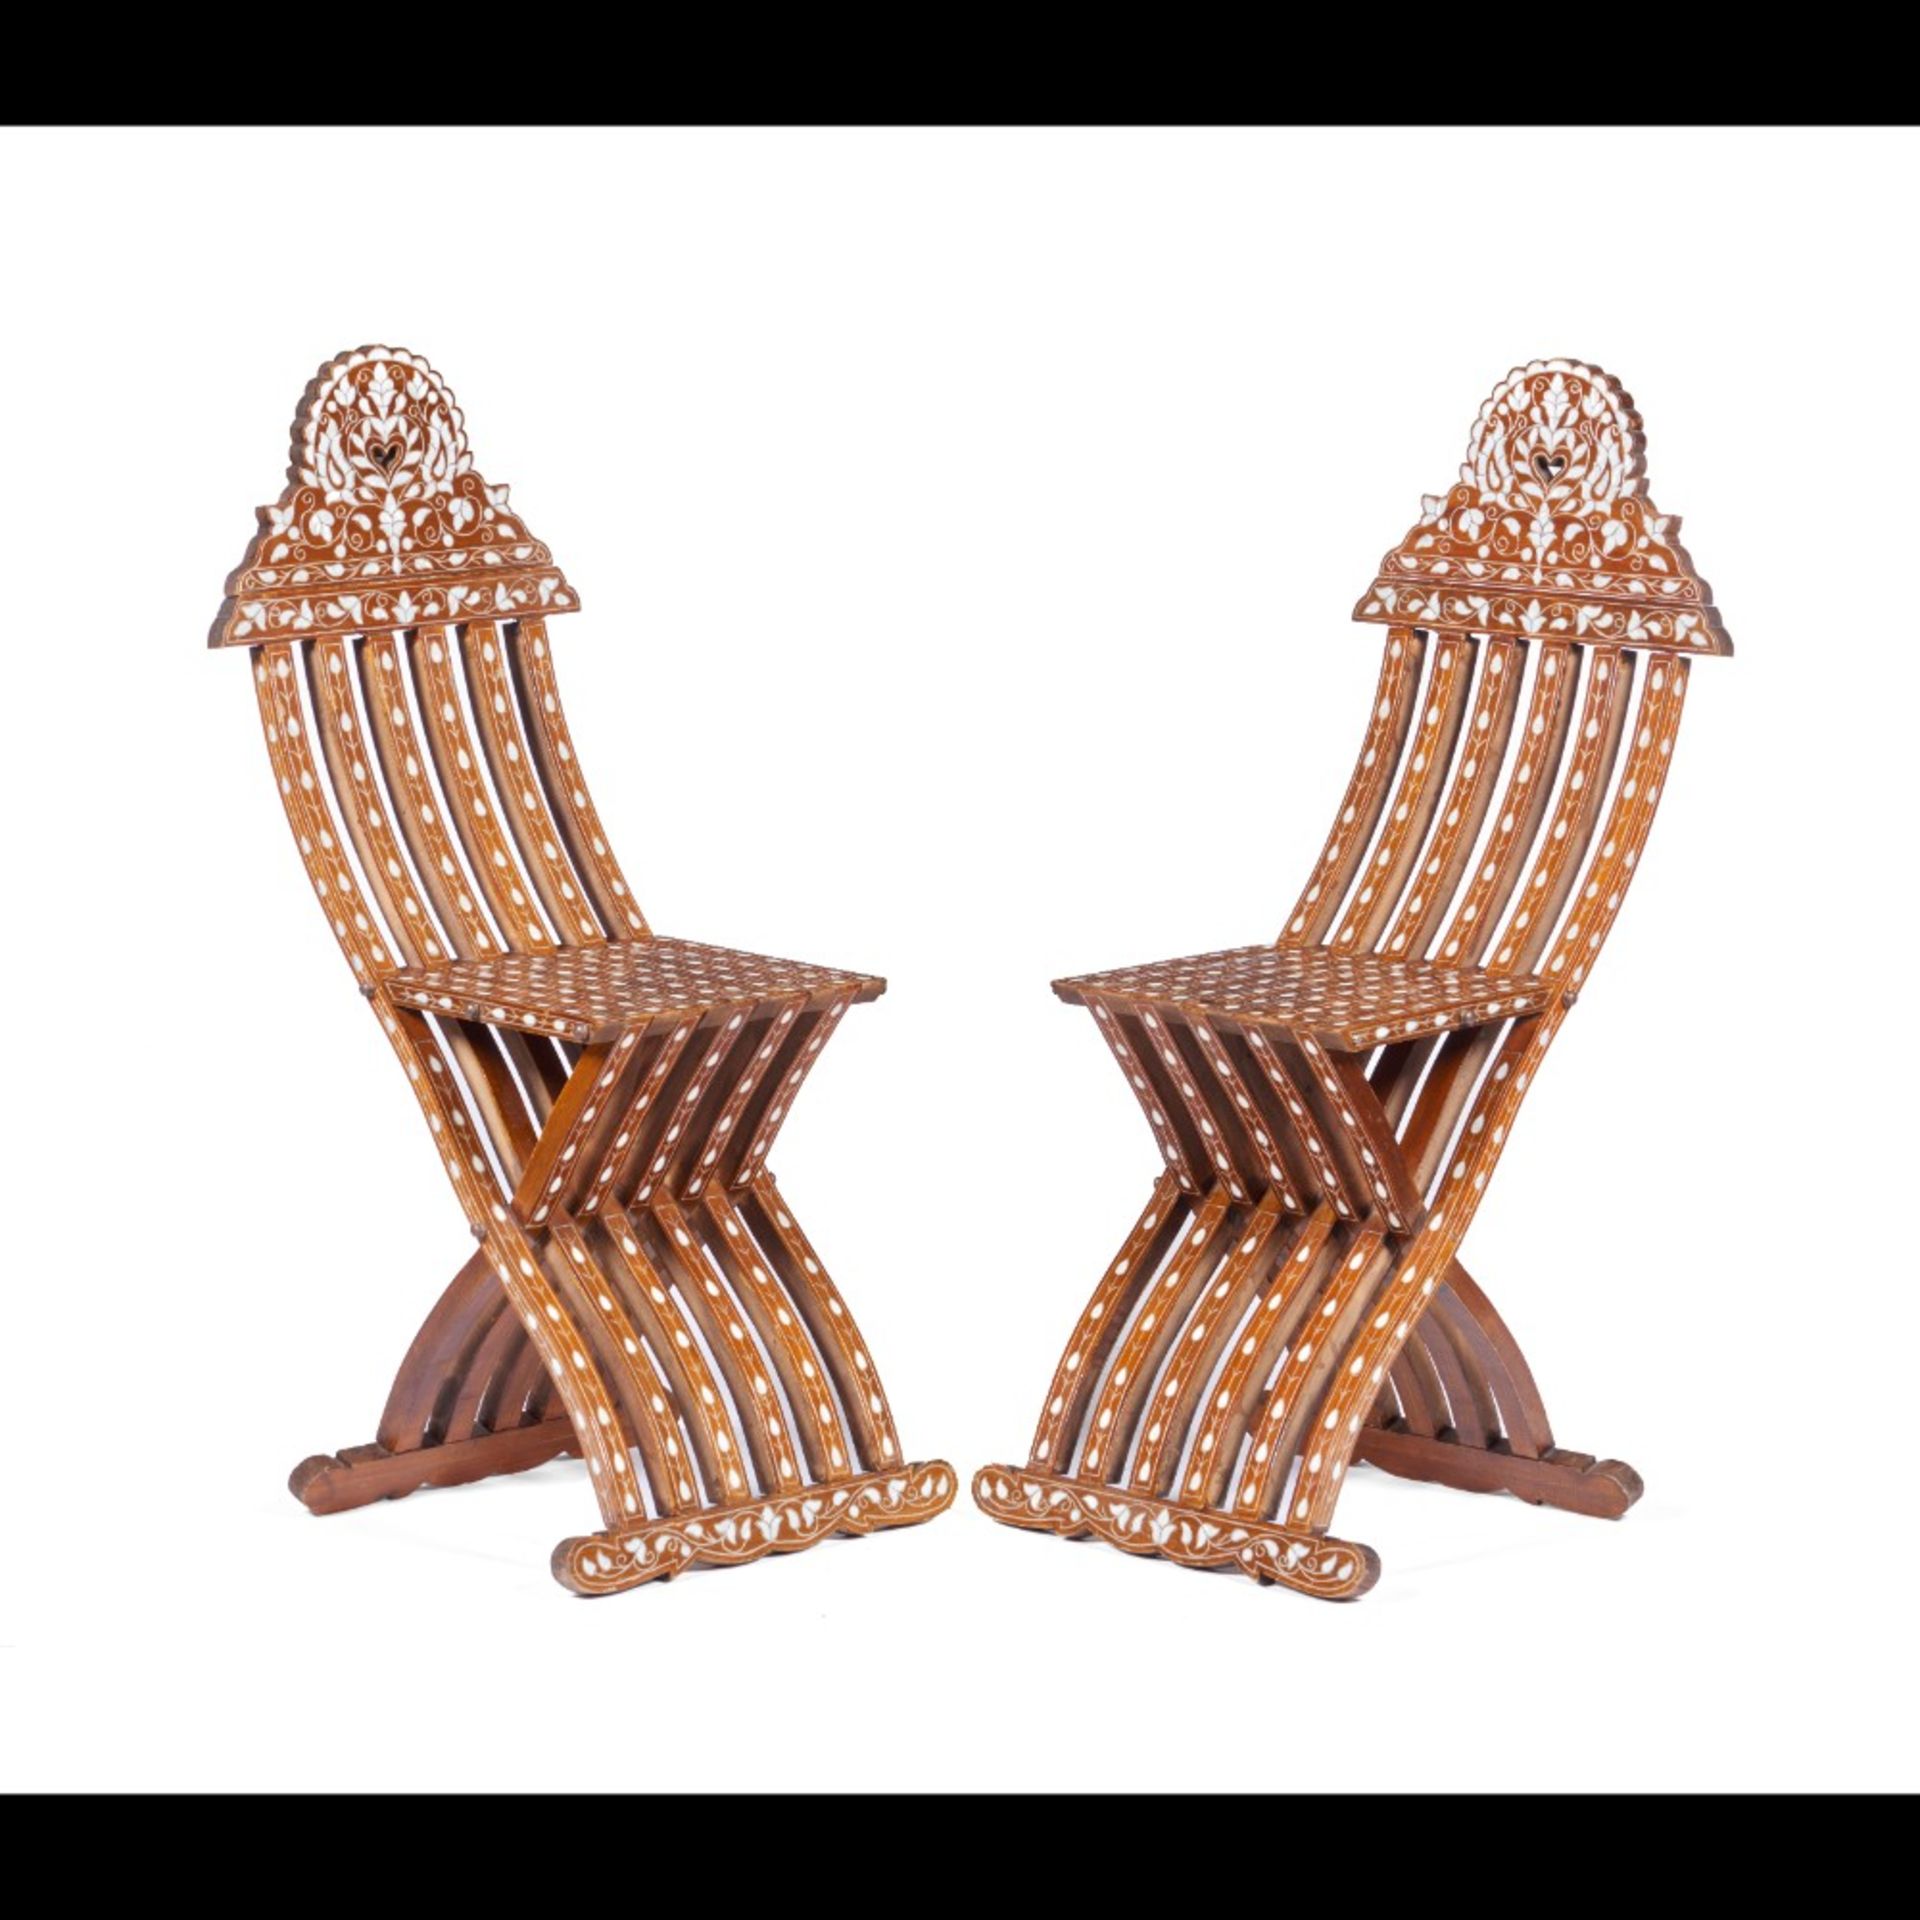  A pair of folding chairs